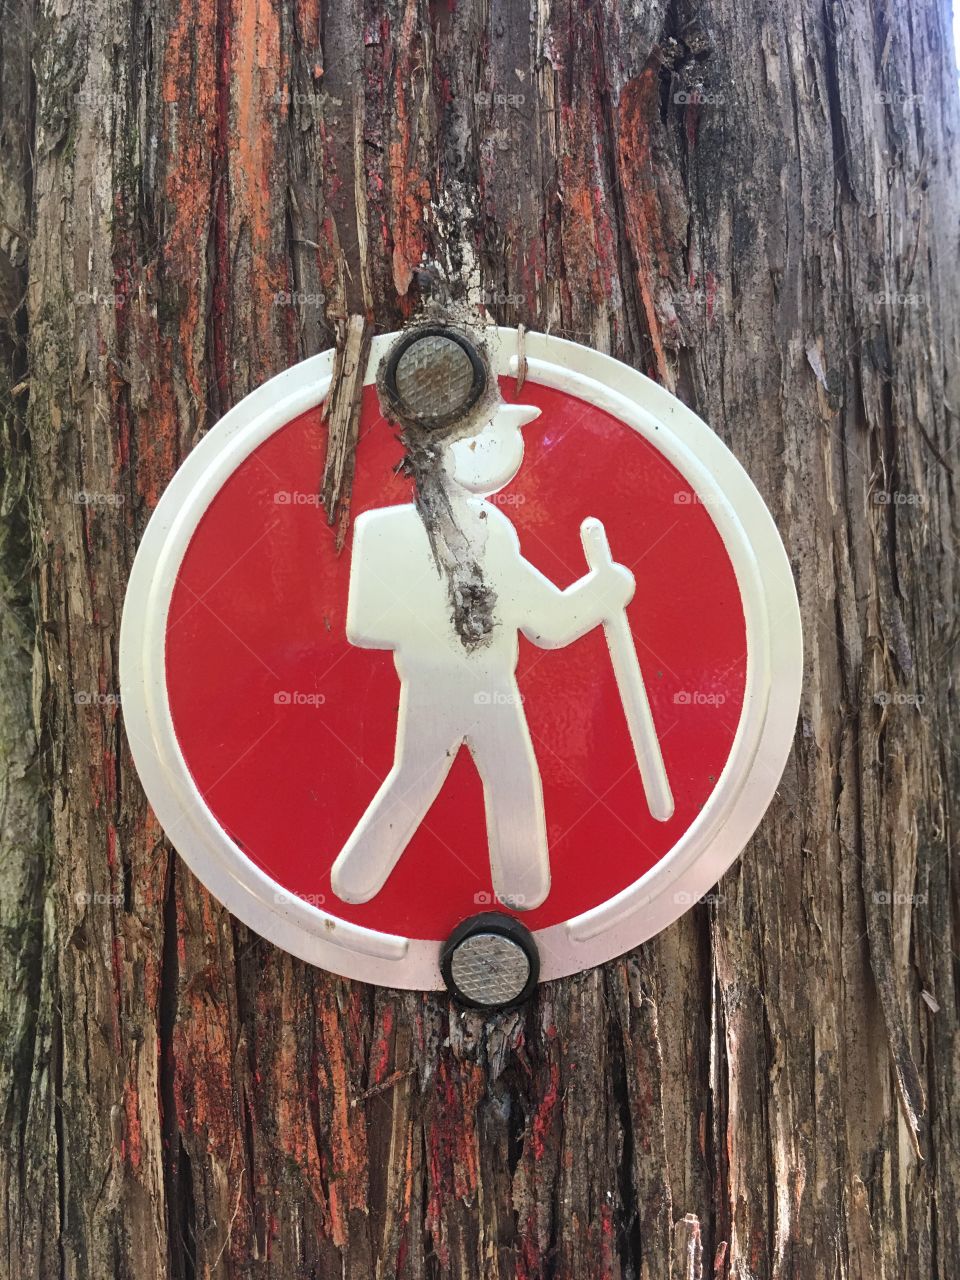 While hiking through this forest, be sure not to take a bolt to the head. This is not optimal hiking strategy. 